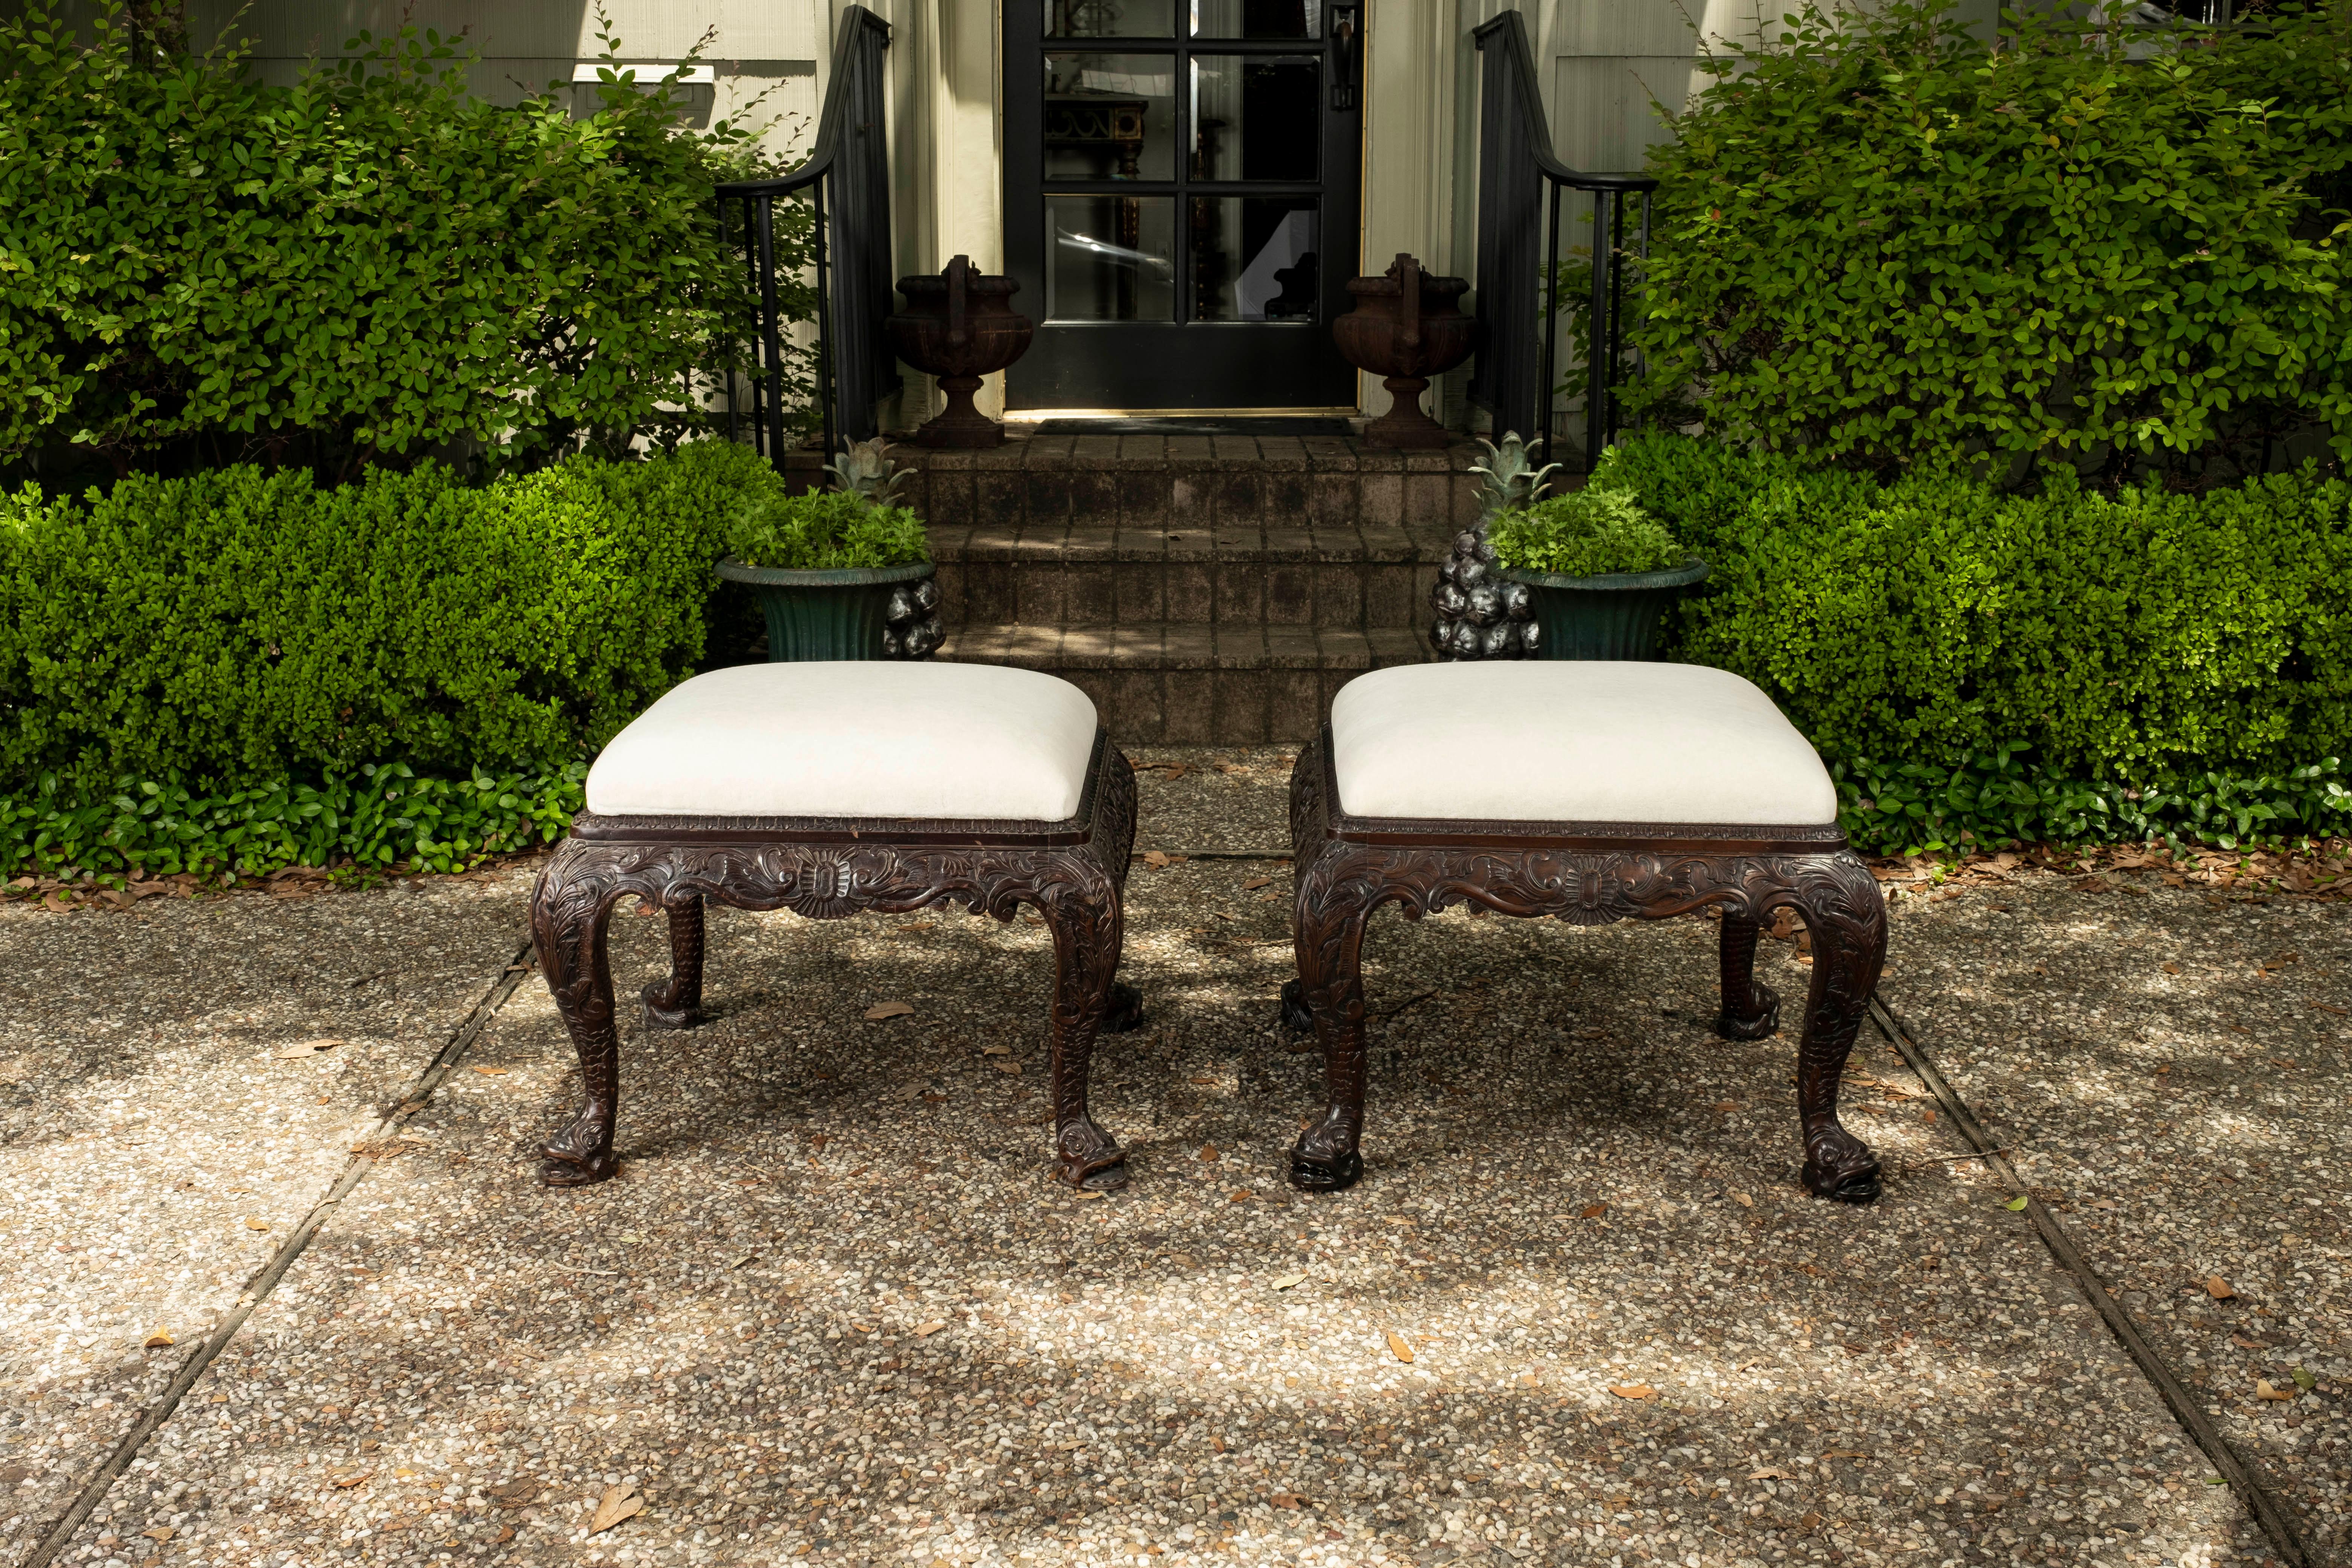 Pair of antique Regency style benches. 
These stunning large English Regency style benches or ottomans are beautifully carved on all sides with lovely dolphin feet. This pair is large enough for extra seating where needed. This pair has been newly